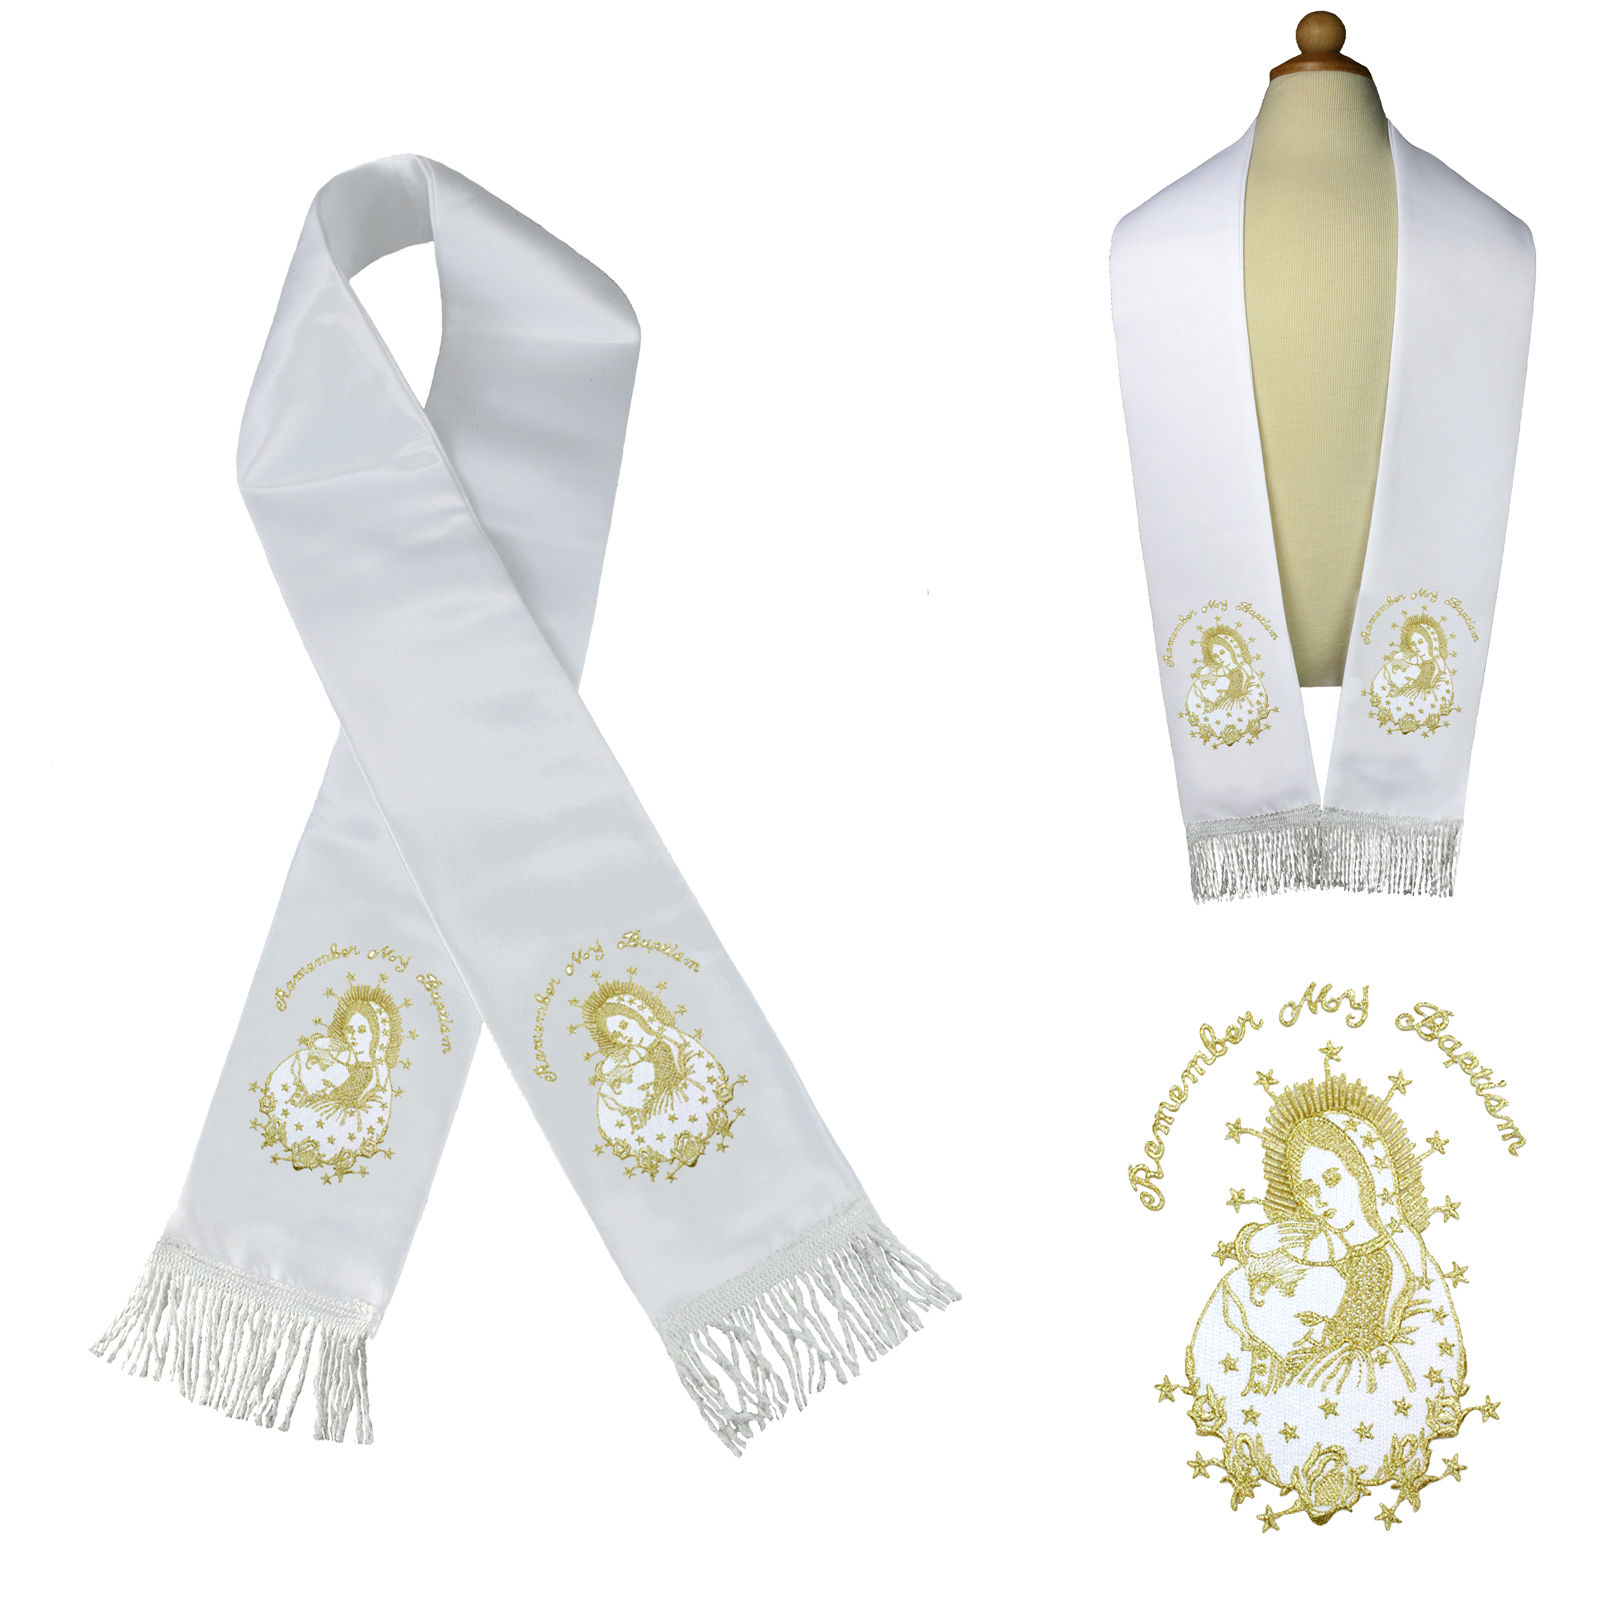 Metallic Embroidered Christening Baptism Stole Scarf Sash Virgin Mary Pope Maria 